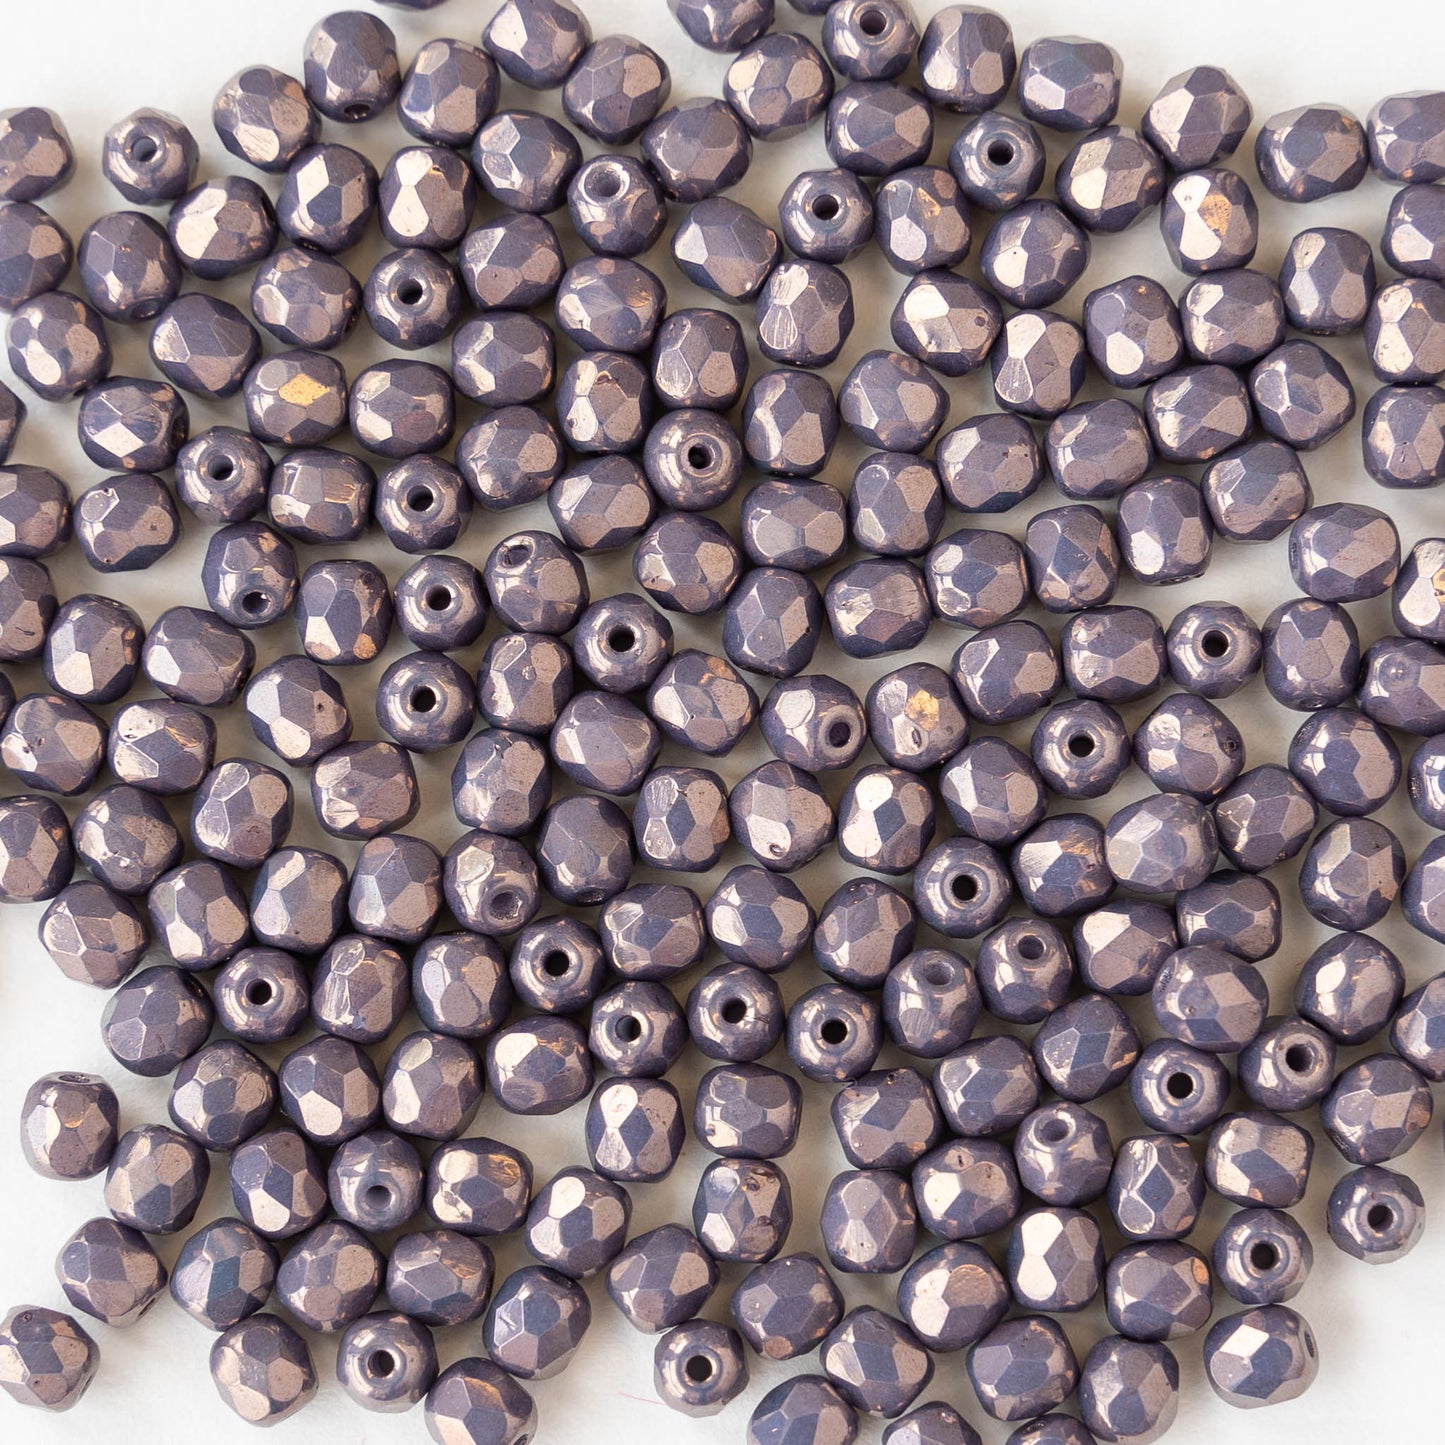 Load image into Gallery viewer, 4mm Round Firepolished Beads - Purple Gray Luster - 100 Beads
